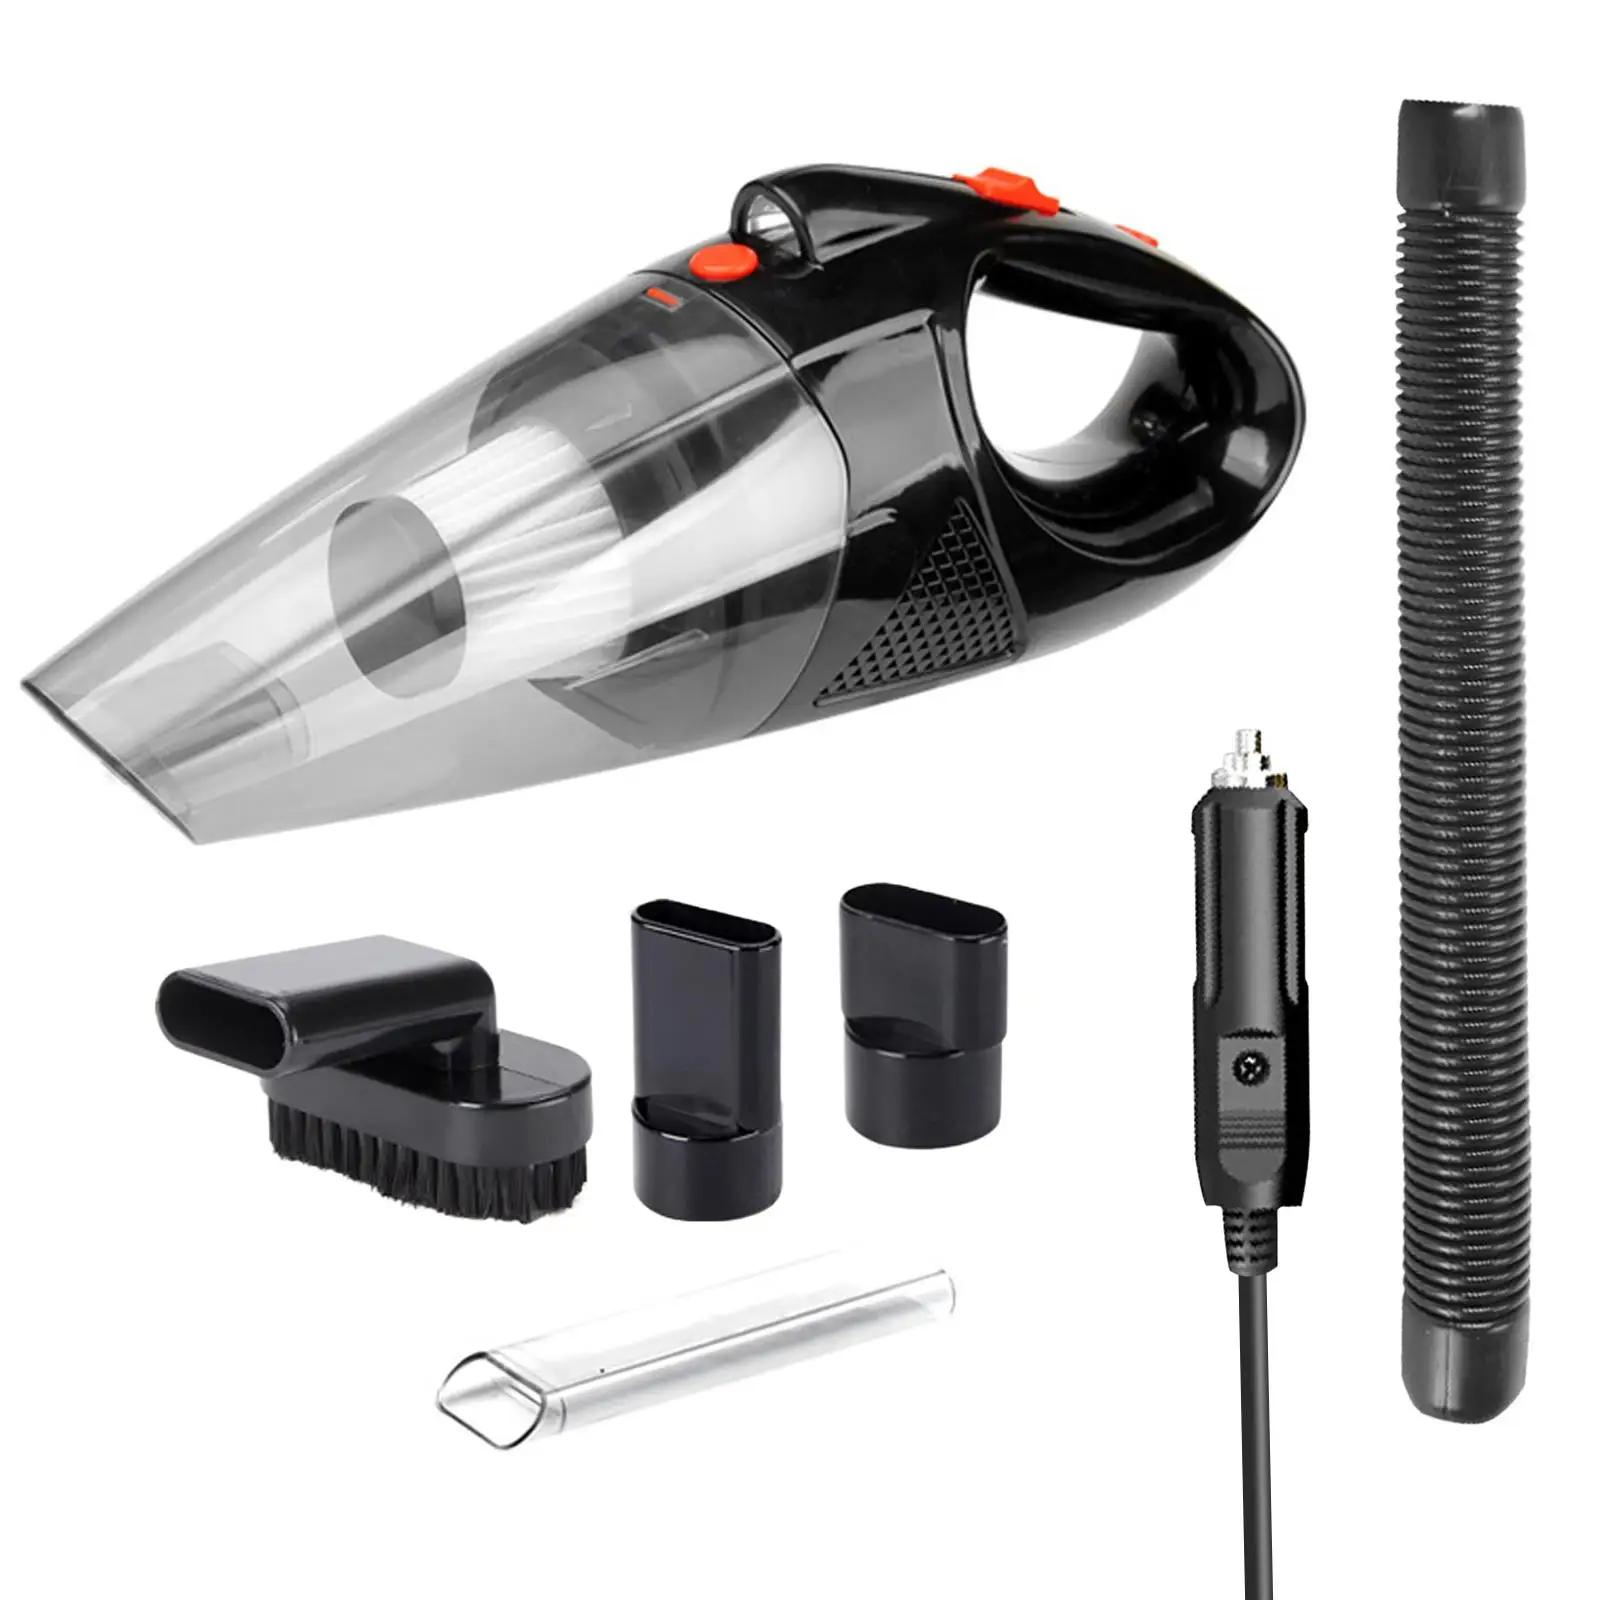 Portable Car Vacuum Cleaner Mini Auto Accessories Wet and Dry Use Strong Suction Lightweight 120W High Power with LED Lighting